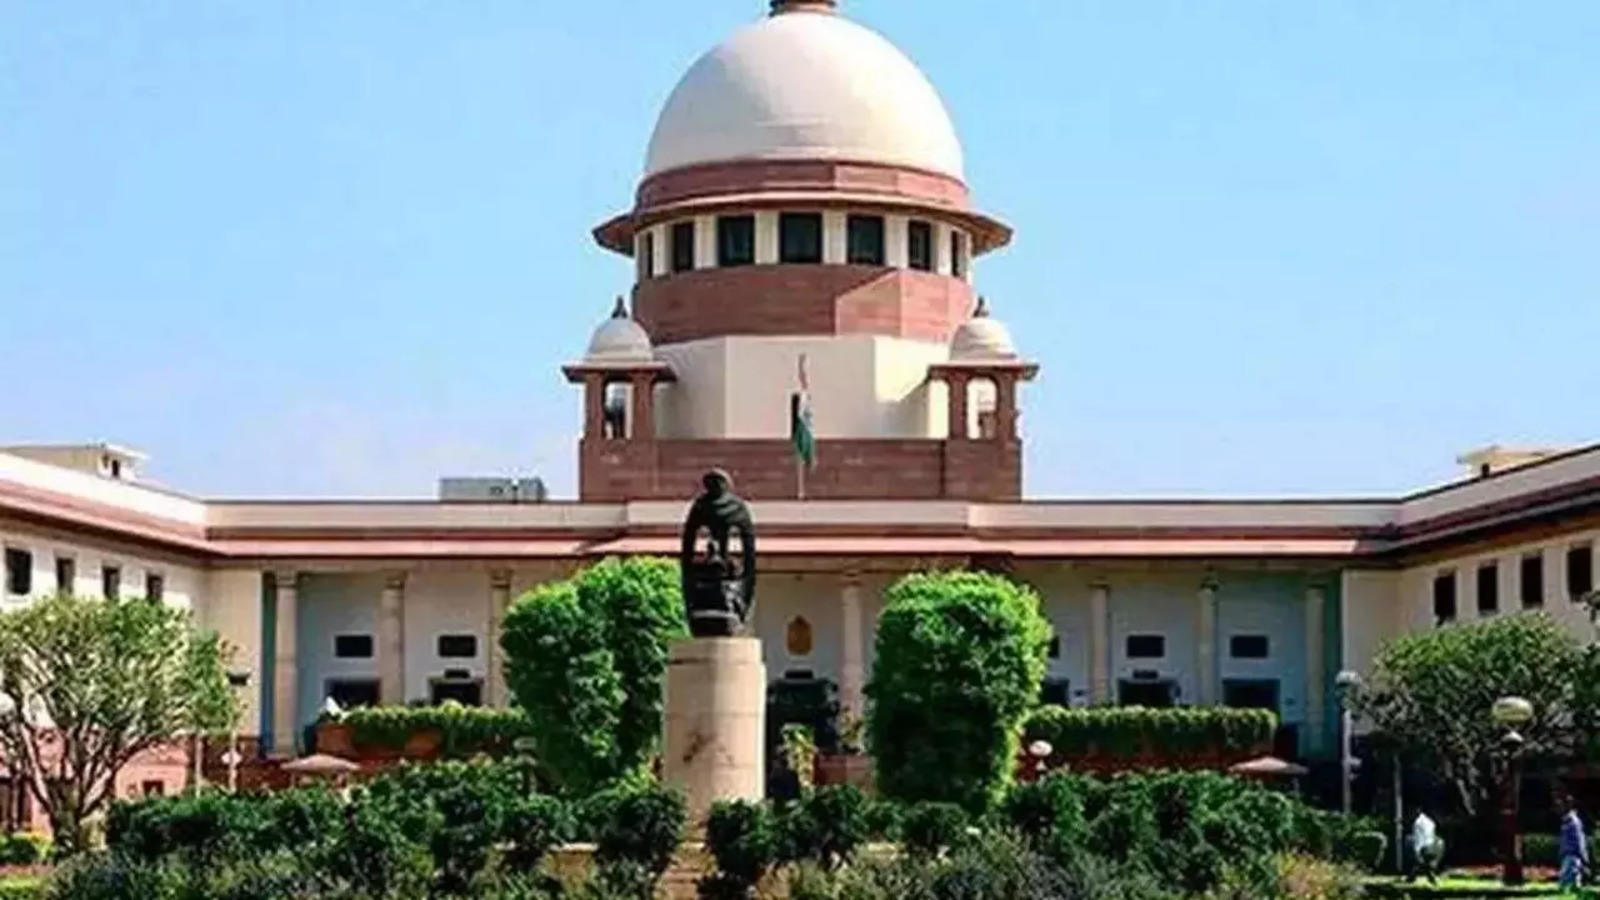 Chandigarh Mayoral Poll: SC Takes Dim View of Presiding Officer’s Action Invalidating Opposition Votes